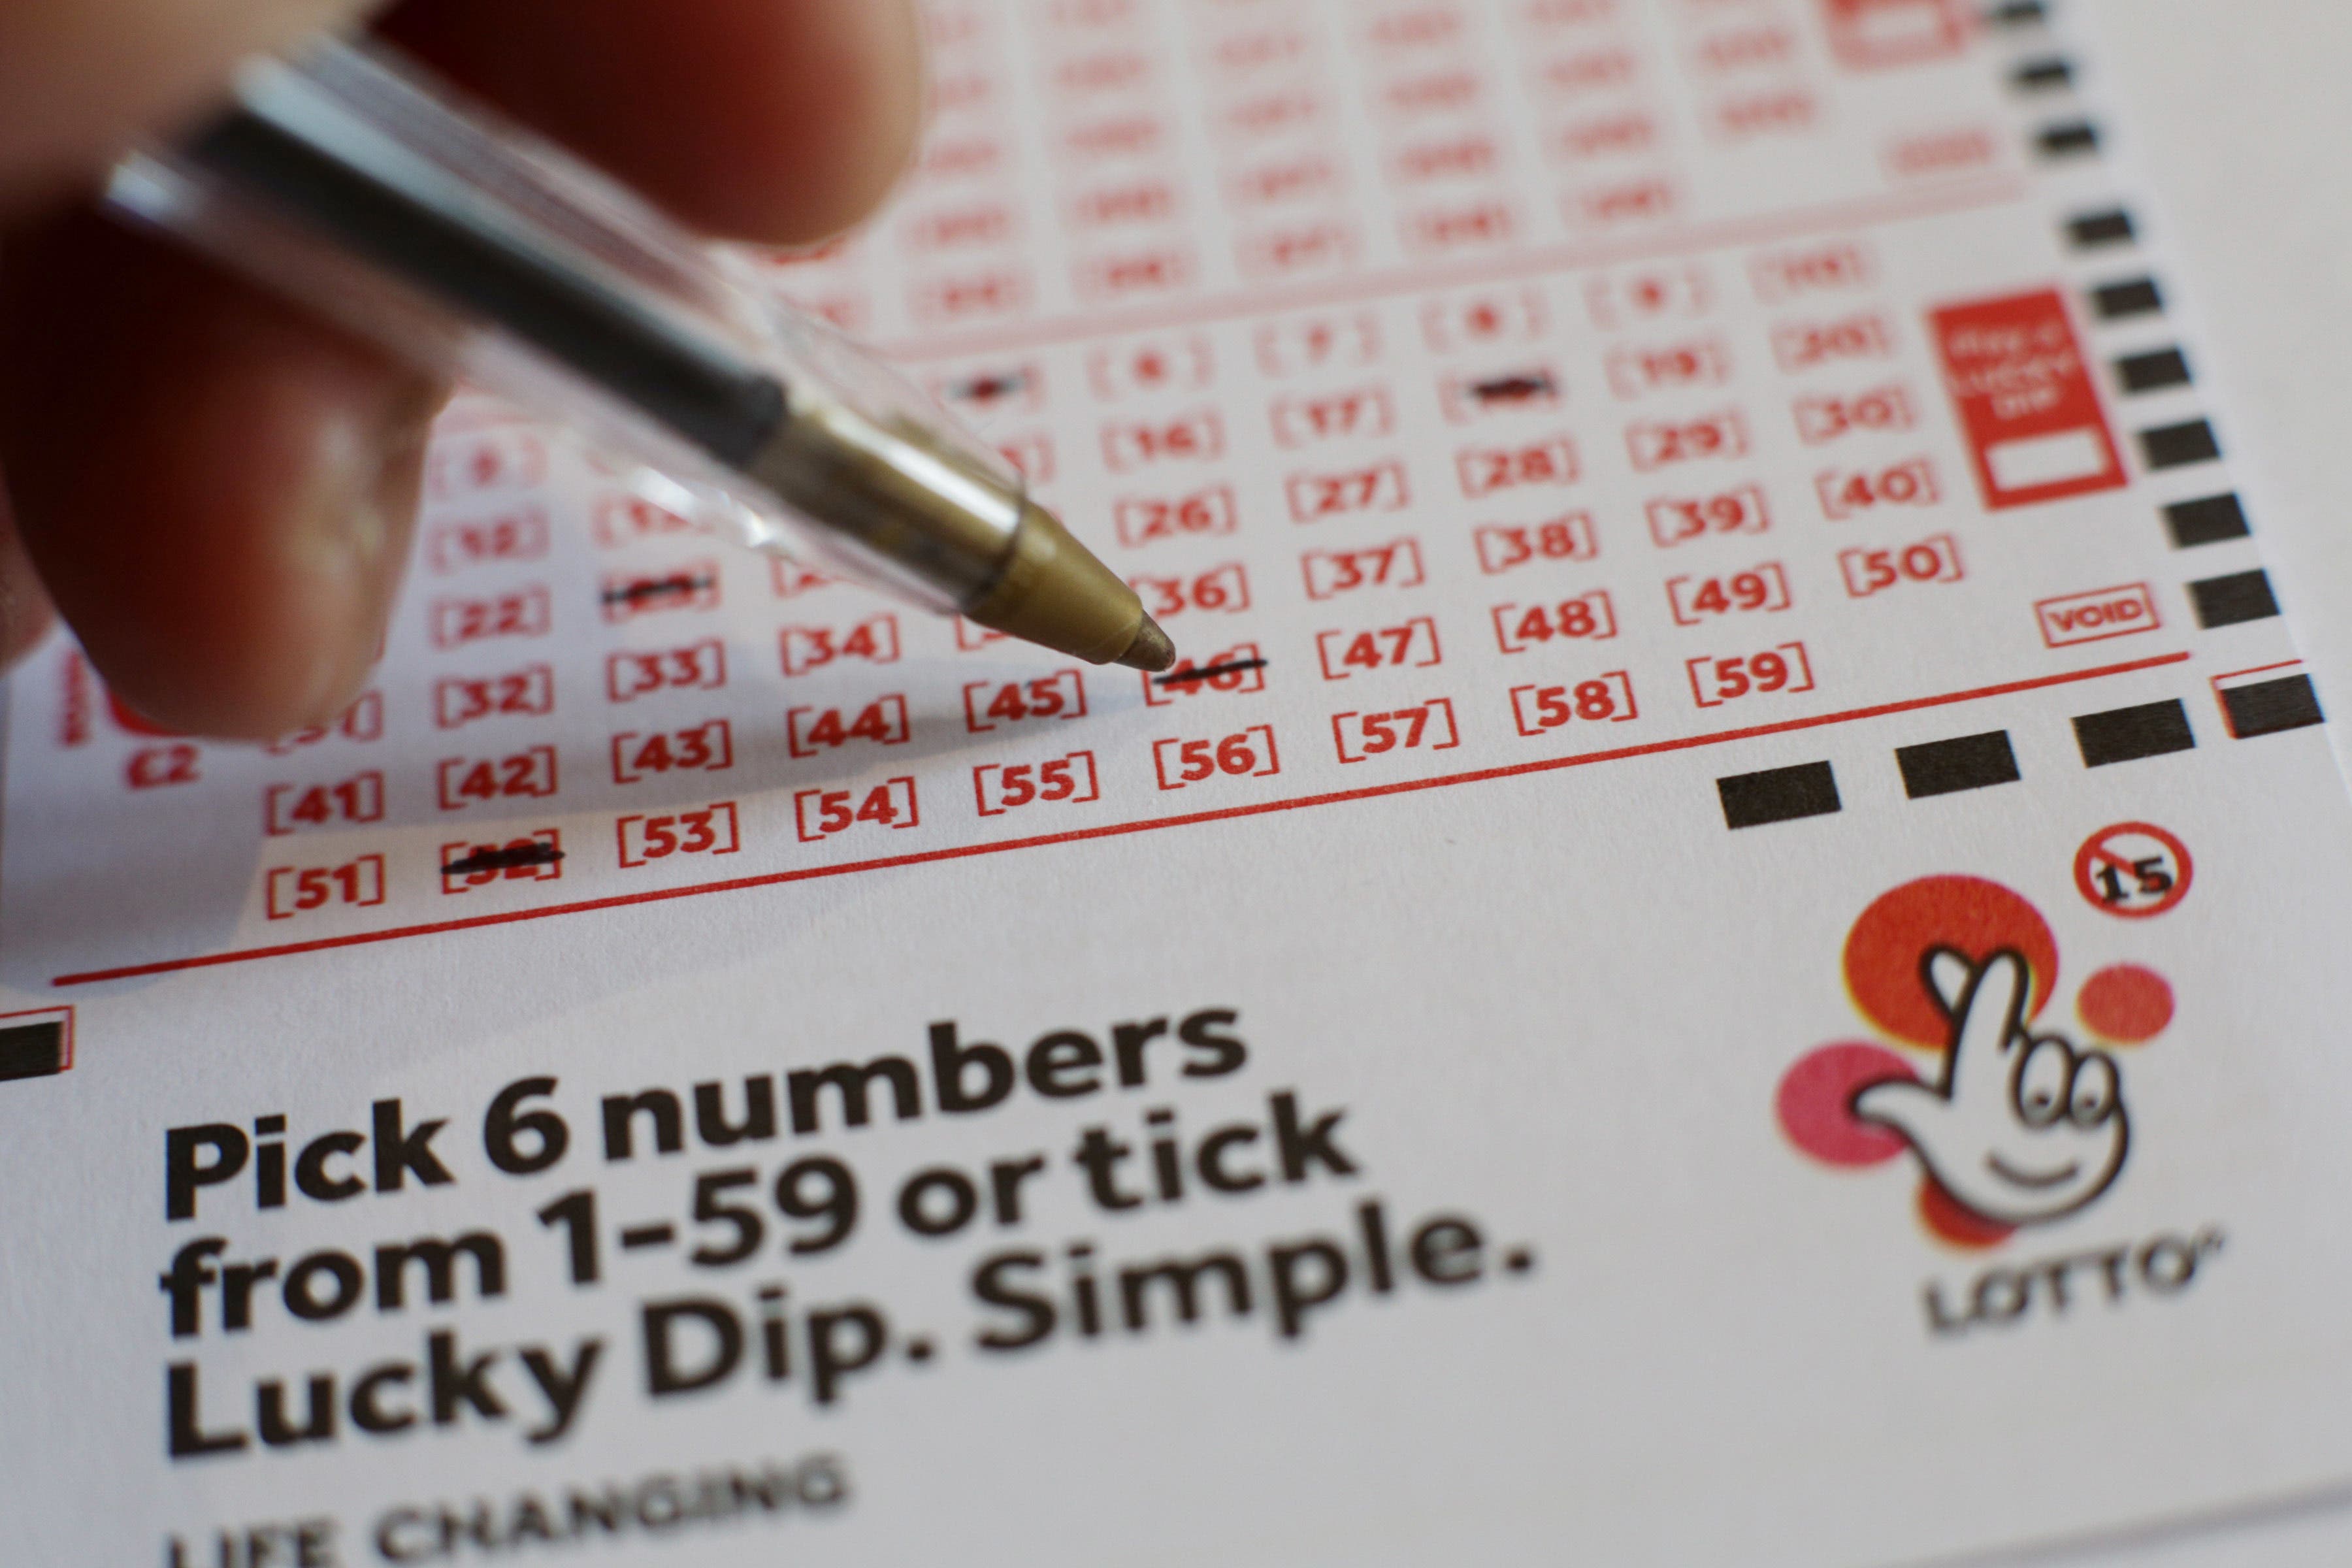 There was more than one millionaire made every day in 2022, the National Lottery said